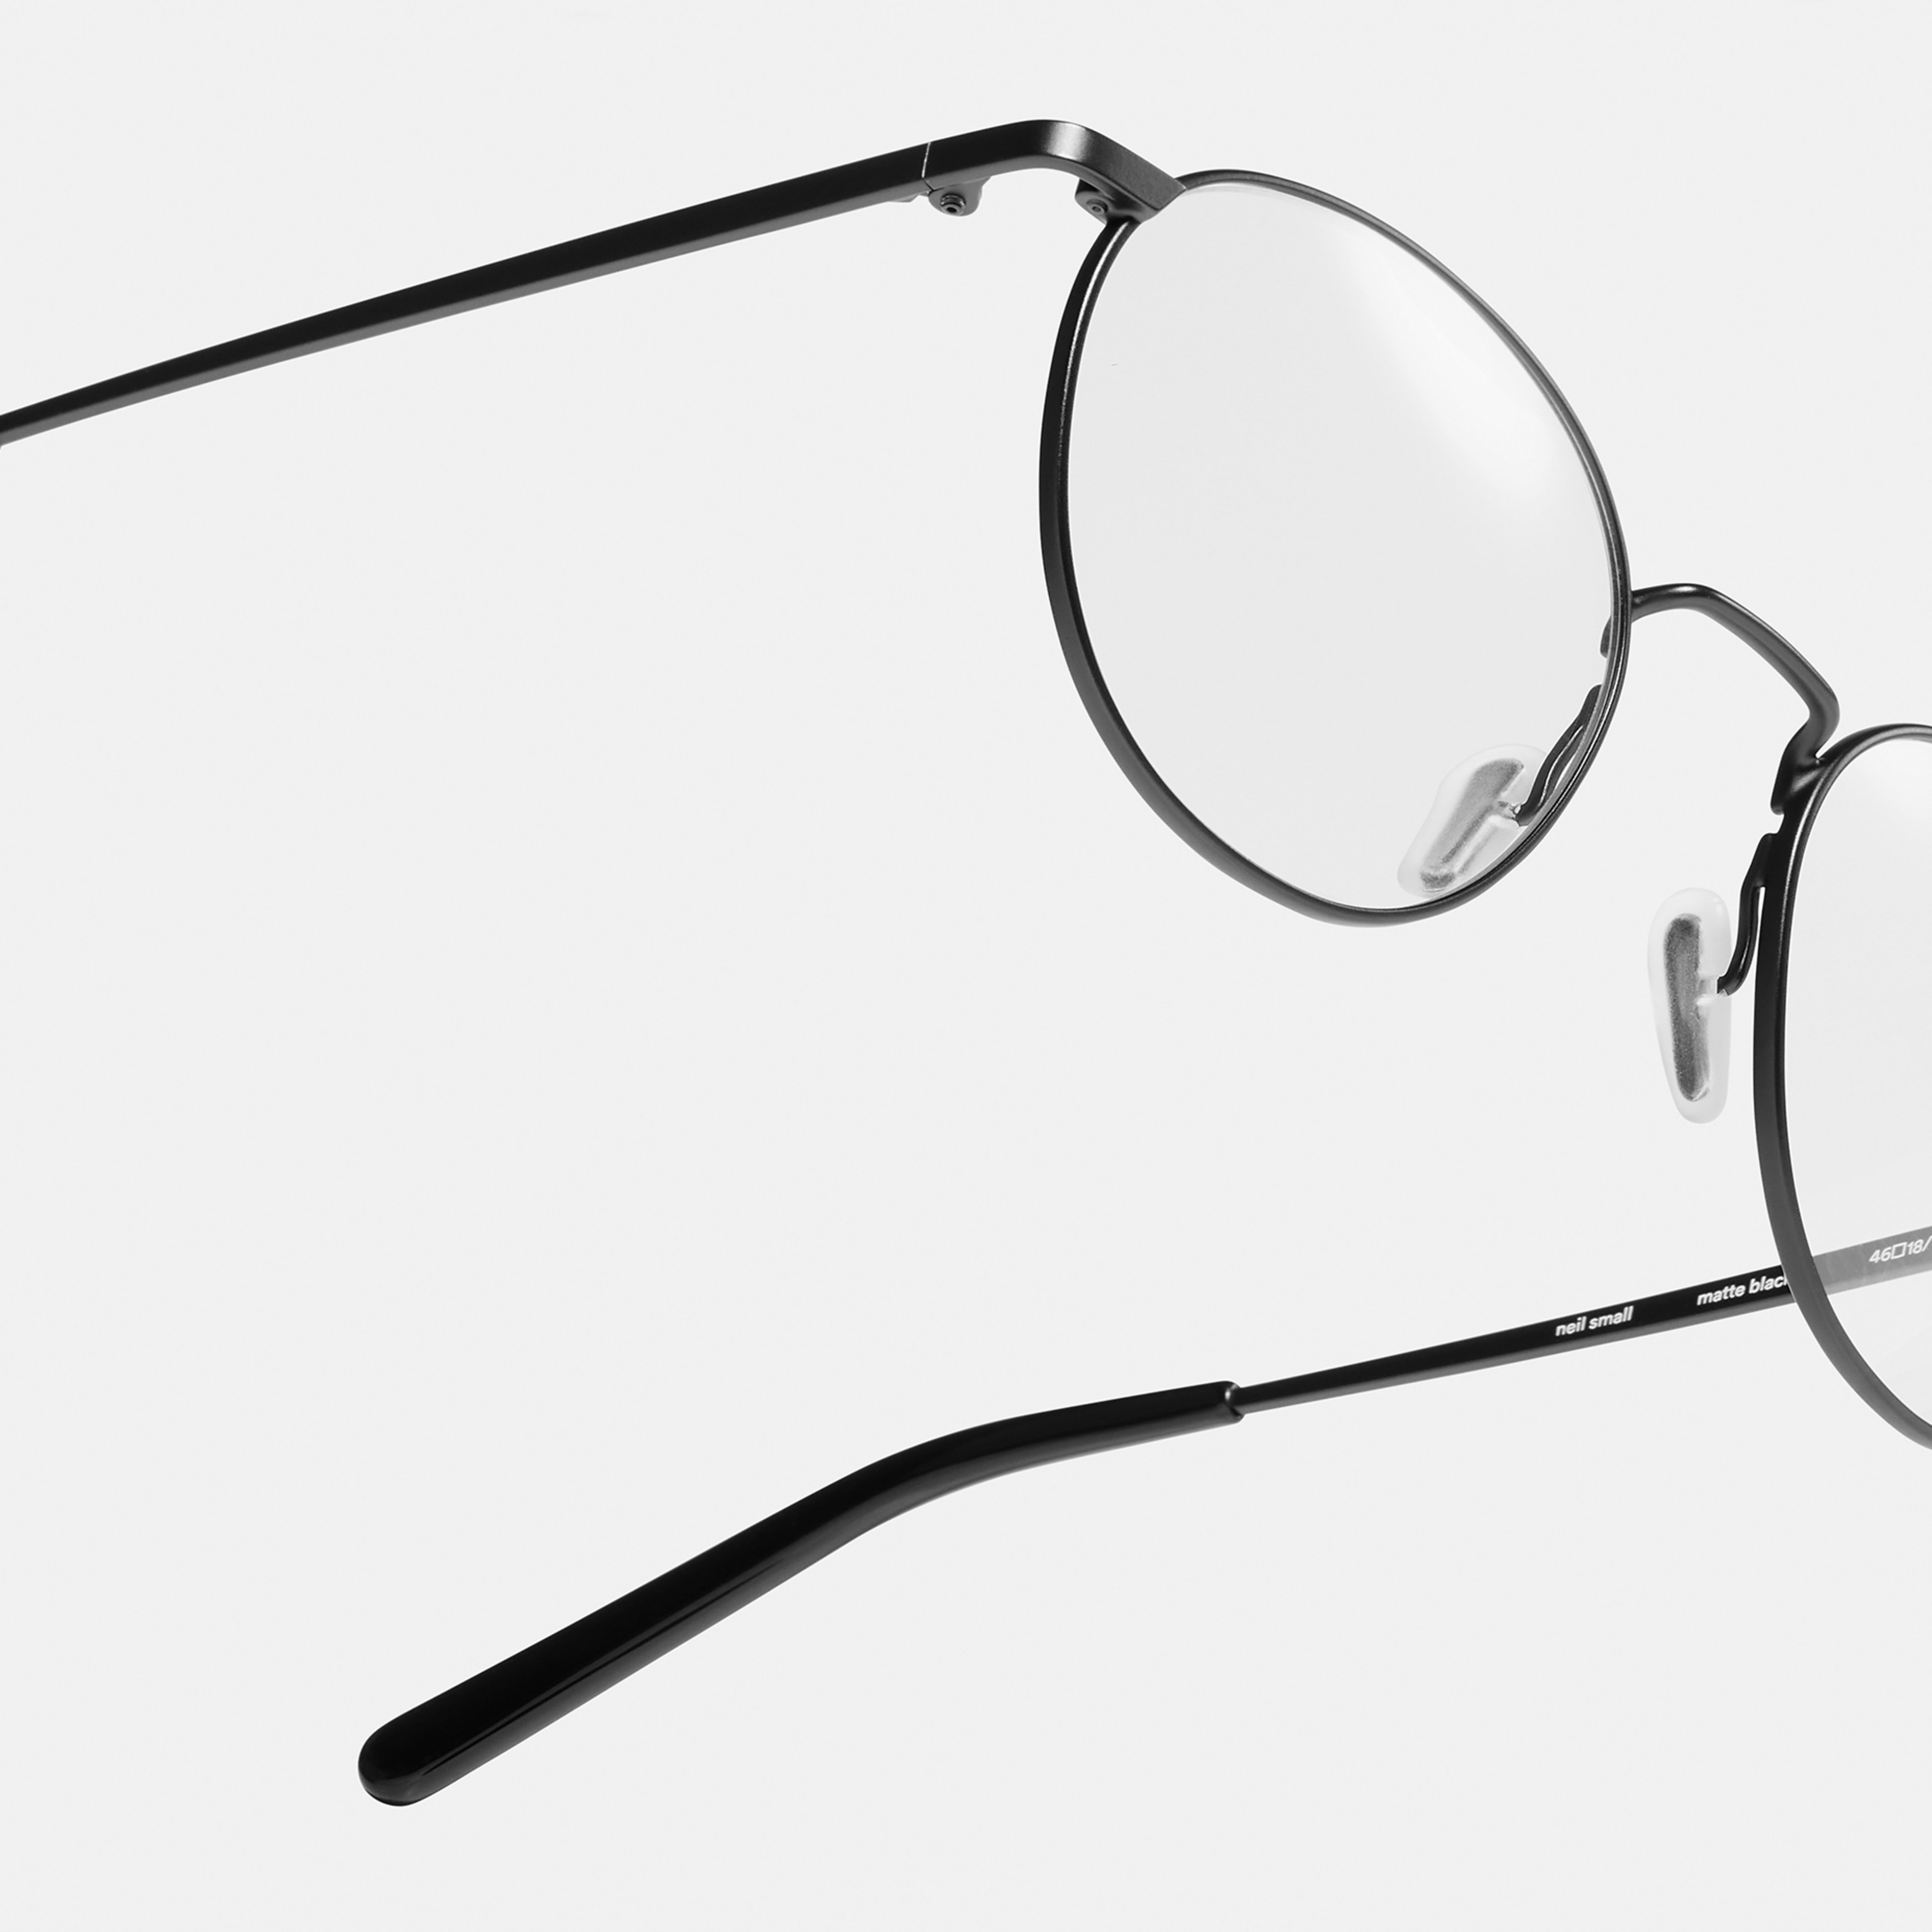 Ace & Tate Glasses | Round Metal in Black